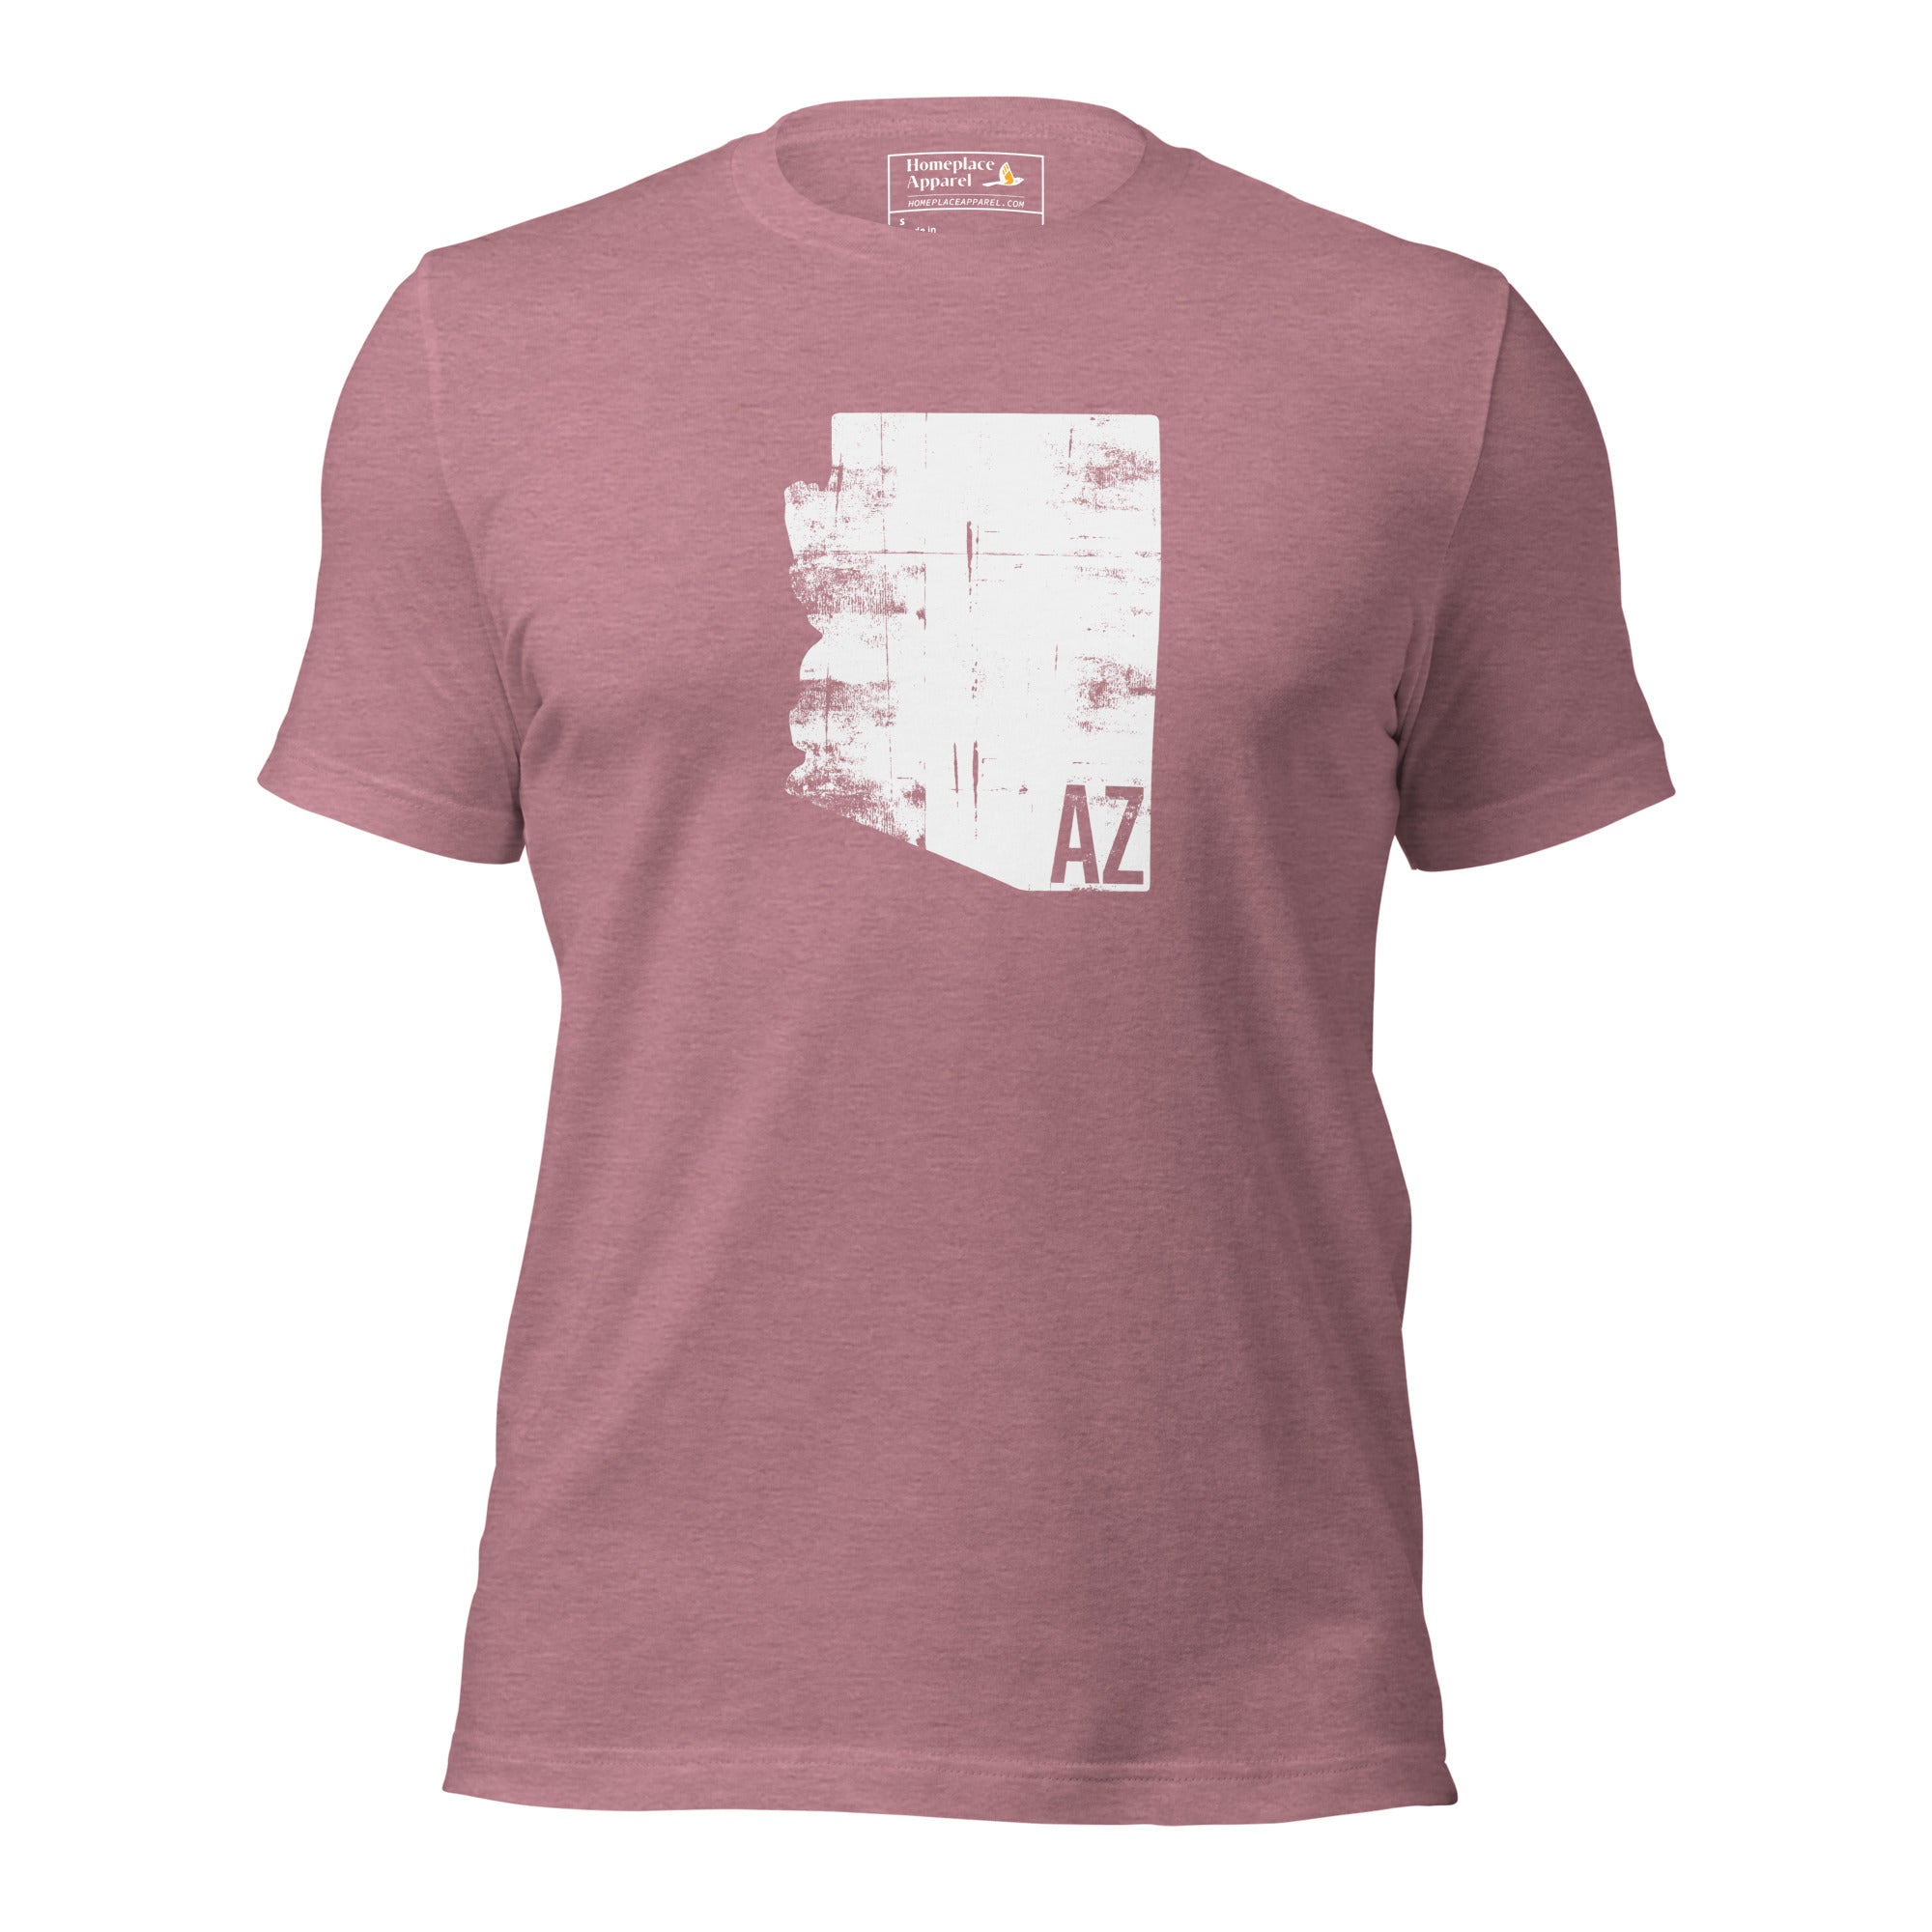 unisex-staple-t-shirt-heather-orchid-front-65008a0f78b97.jpg